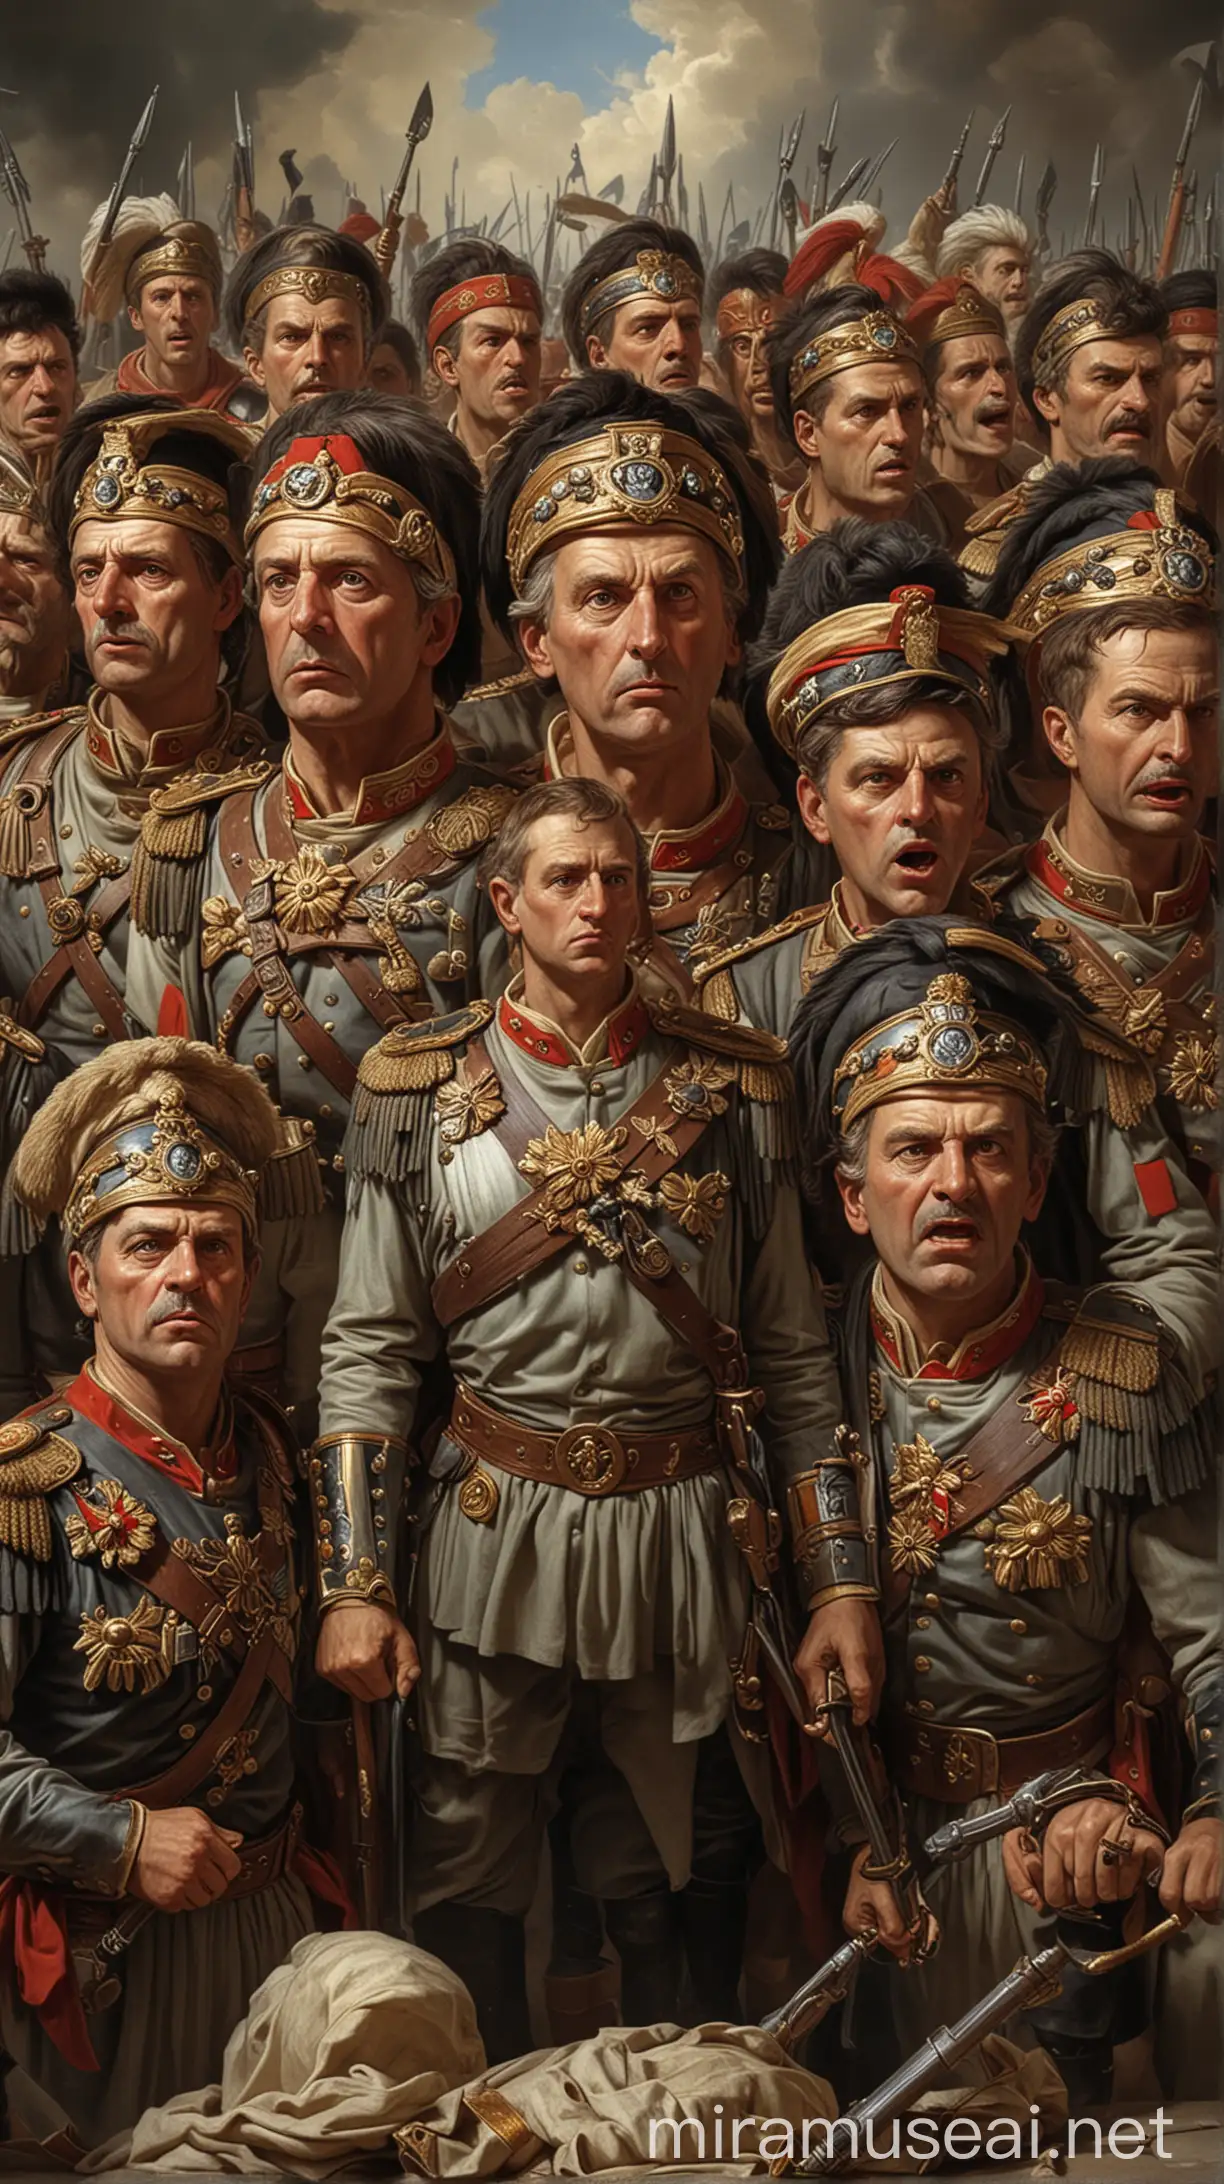  Alexander's generals, with ambitious expressions, vying for power." hyper realistic